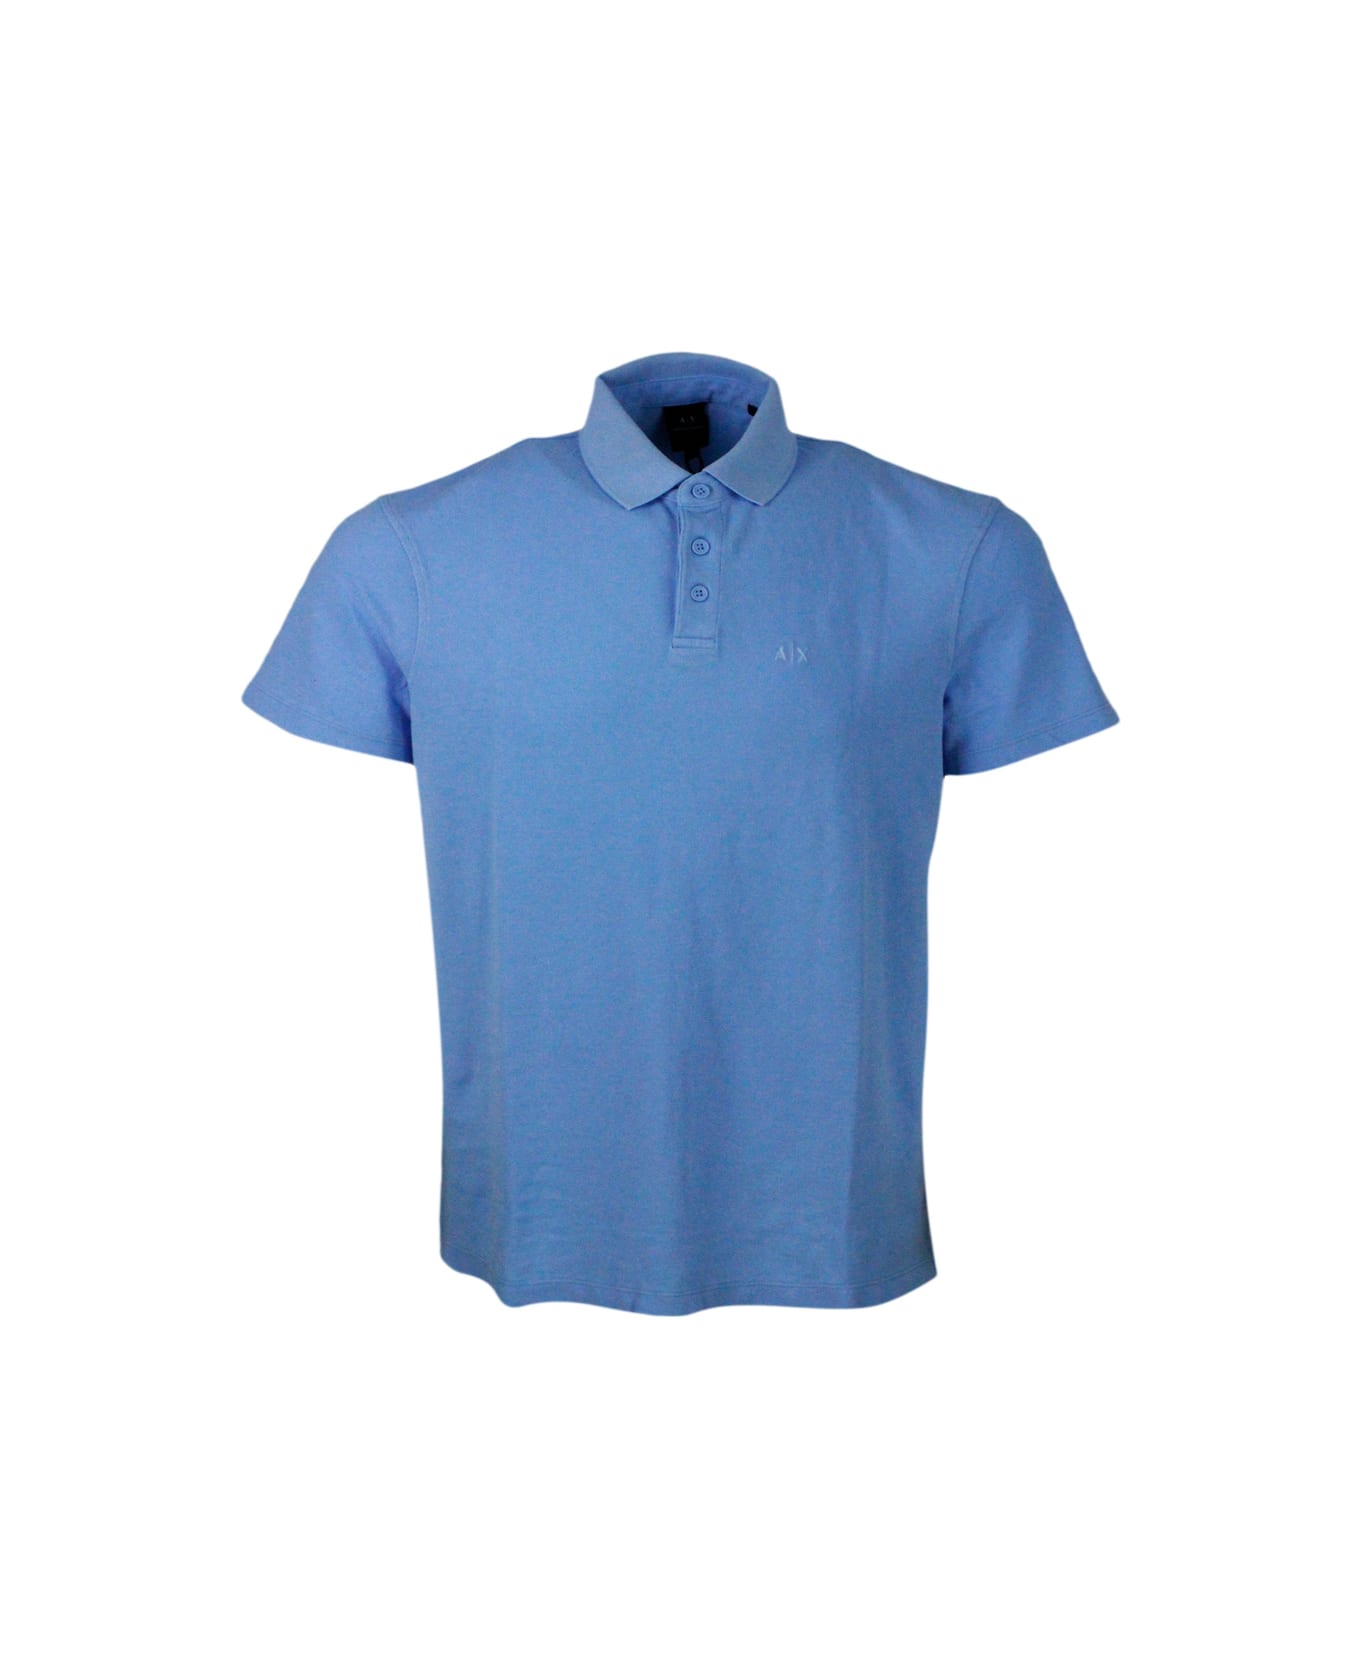 Armani Collezioni 3-button Short-sleeved Pique Cotton Polo Shirt With Logo Embroidered On The Chest - Light Blu